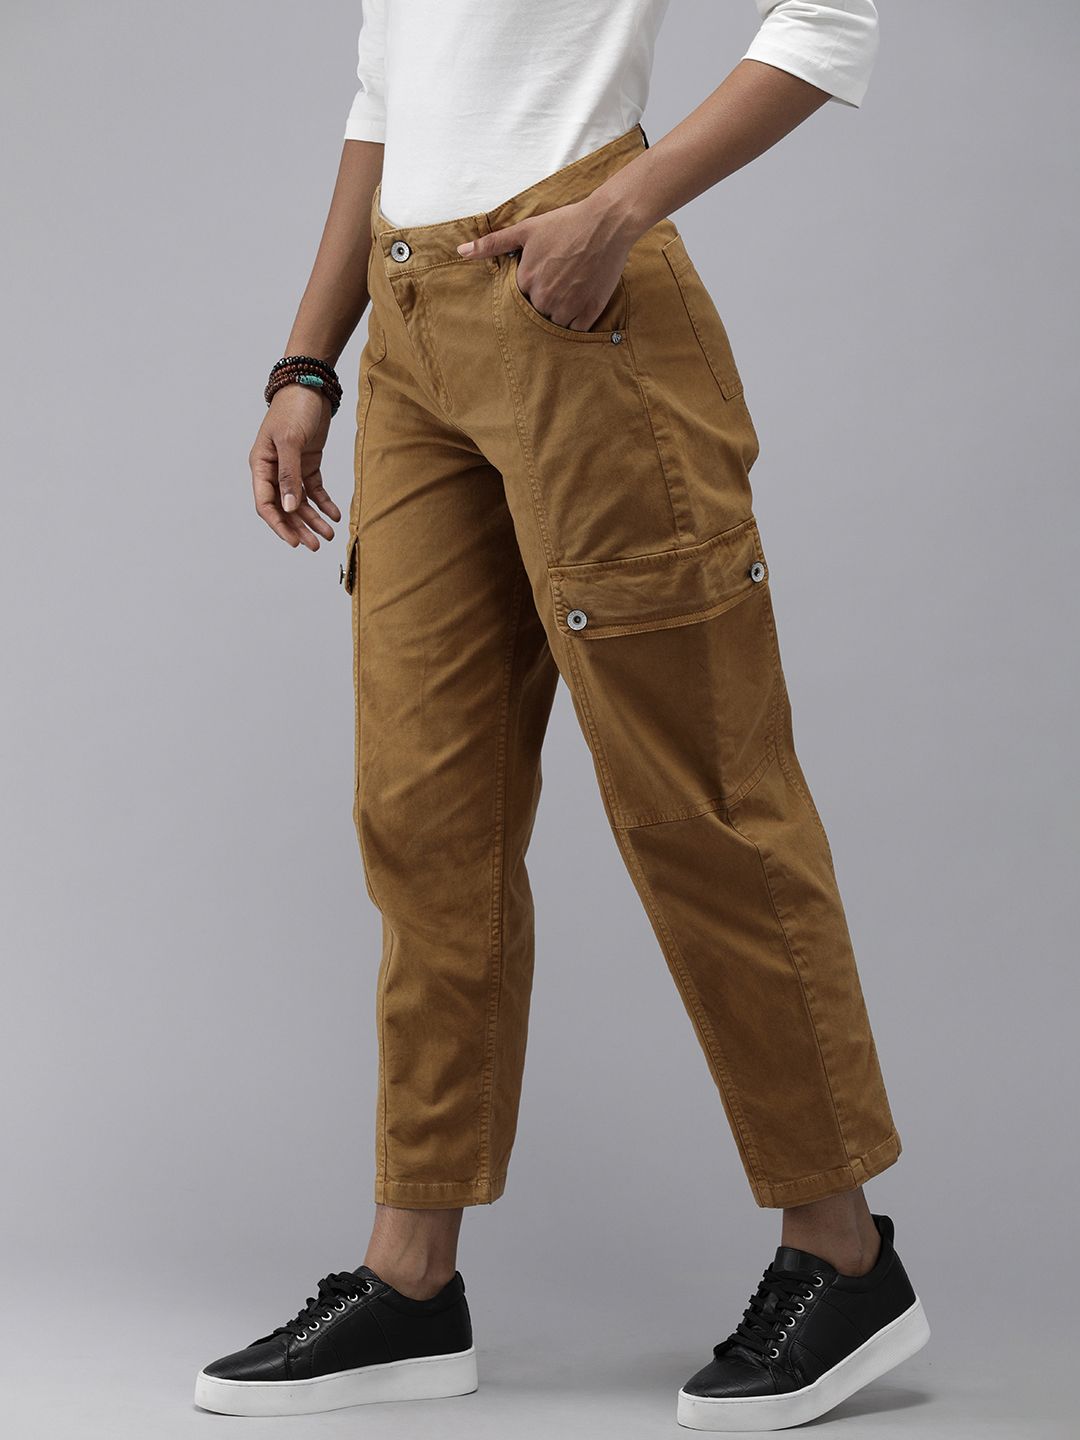 Roadster Women Brown Solid Cargos Trousers Price in India